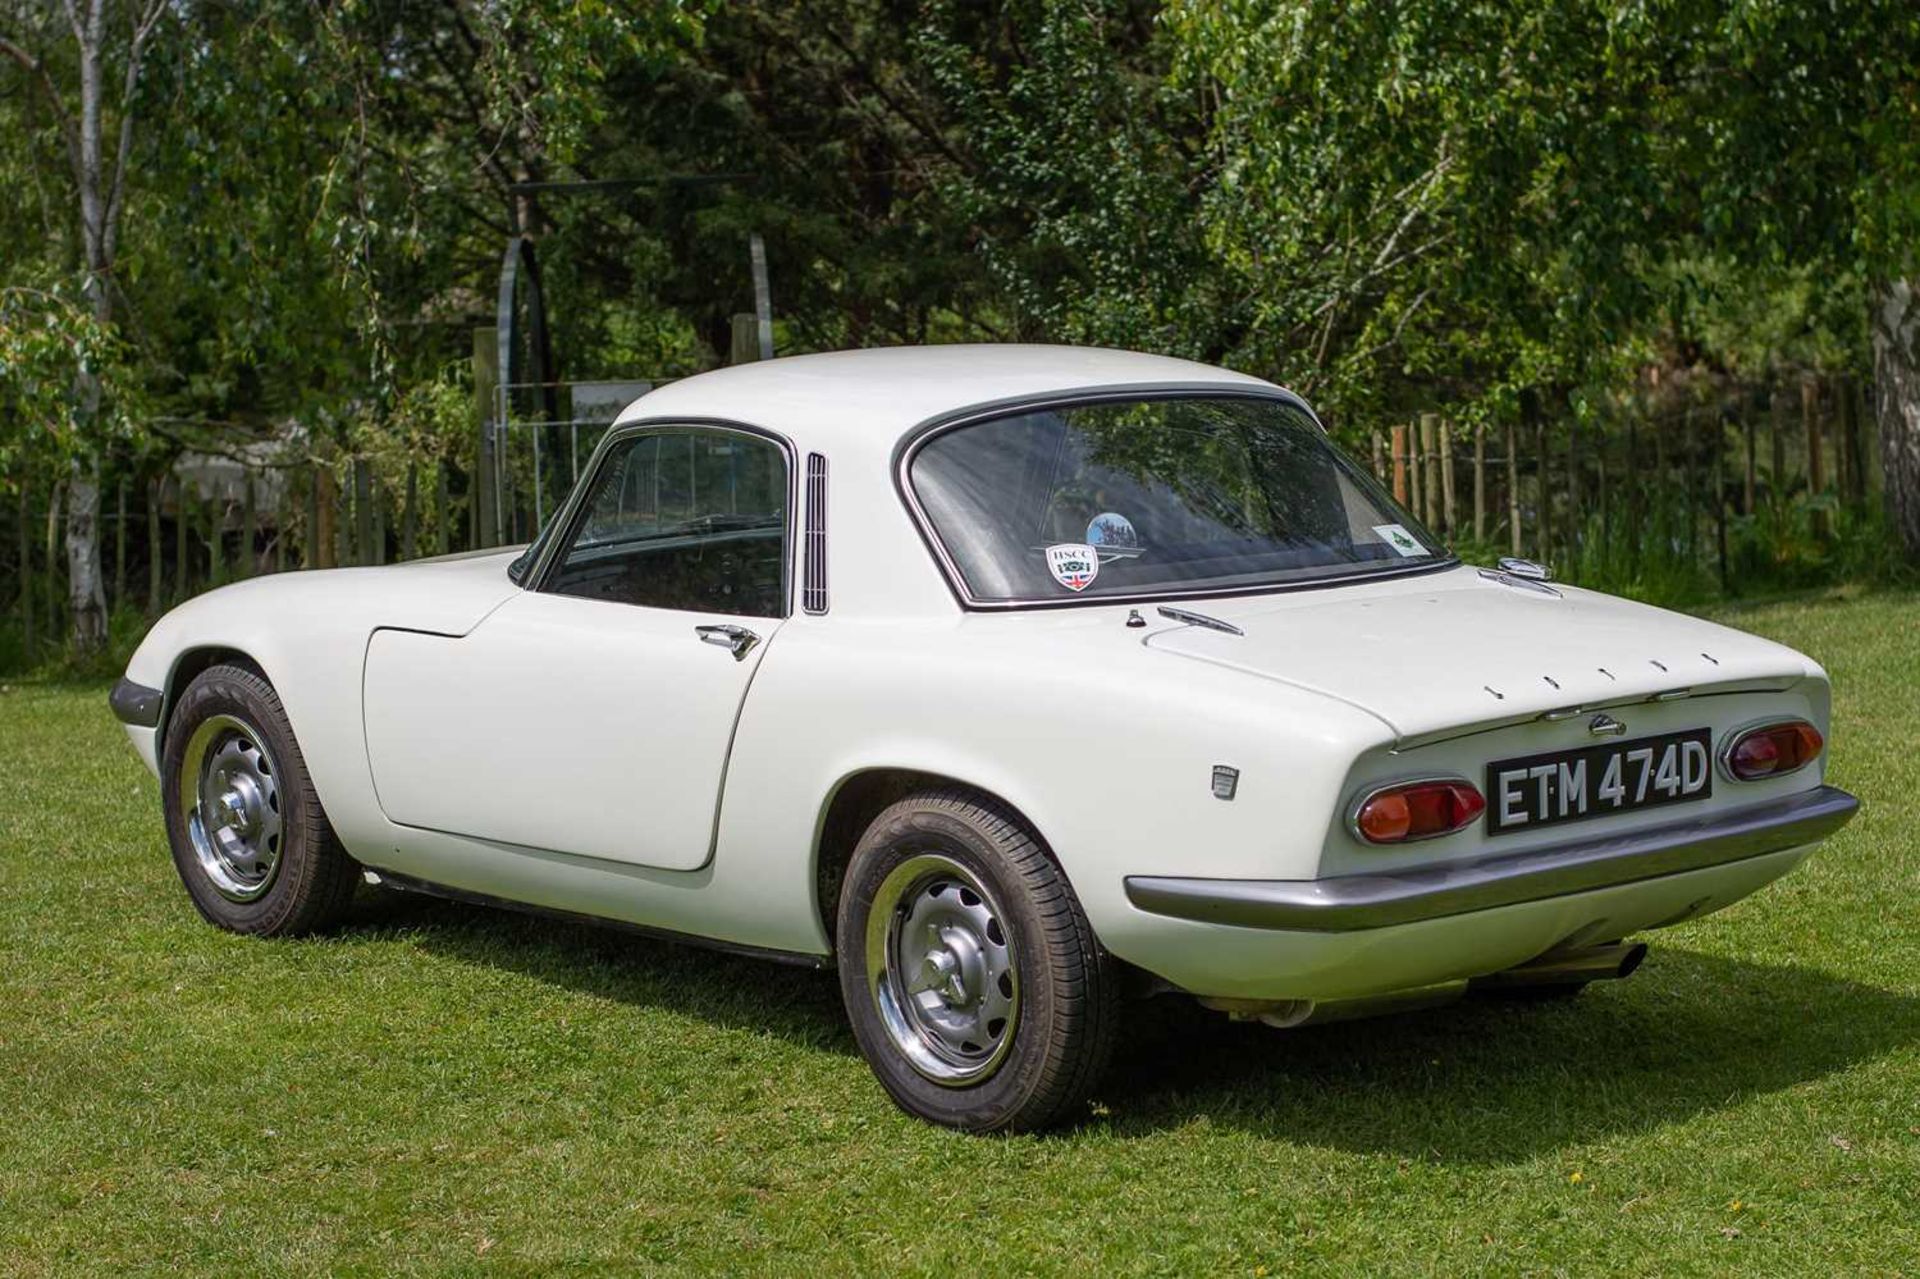 1966 Lotus Elan Fixed Head Coupe Sympathetically restored, equipped with desirable upgrades - Image 12 of 100